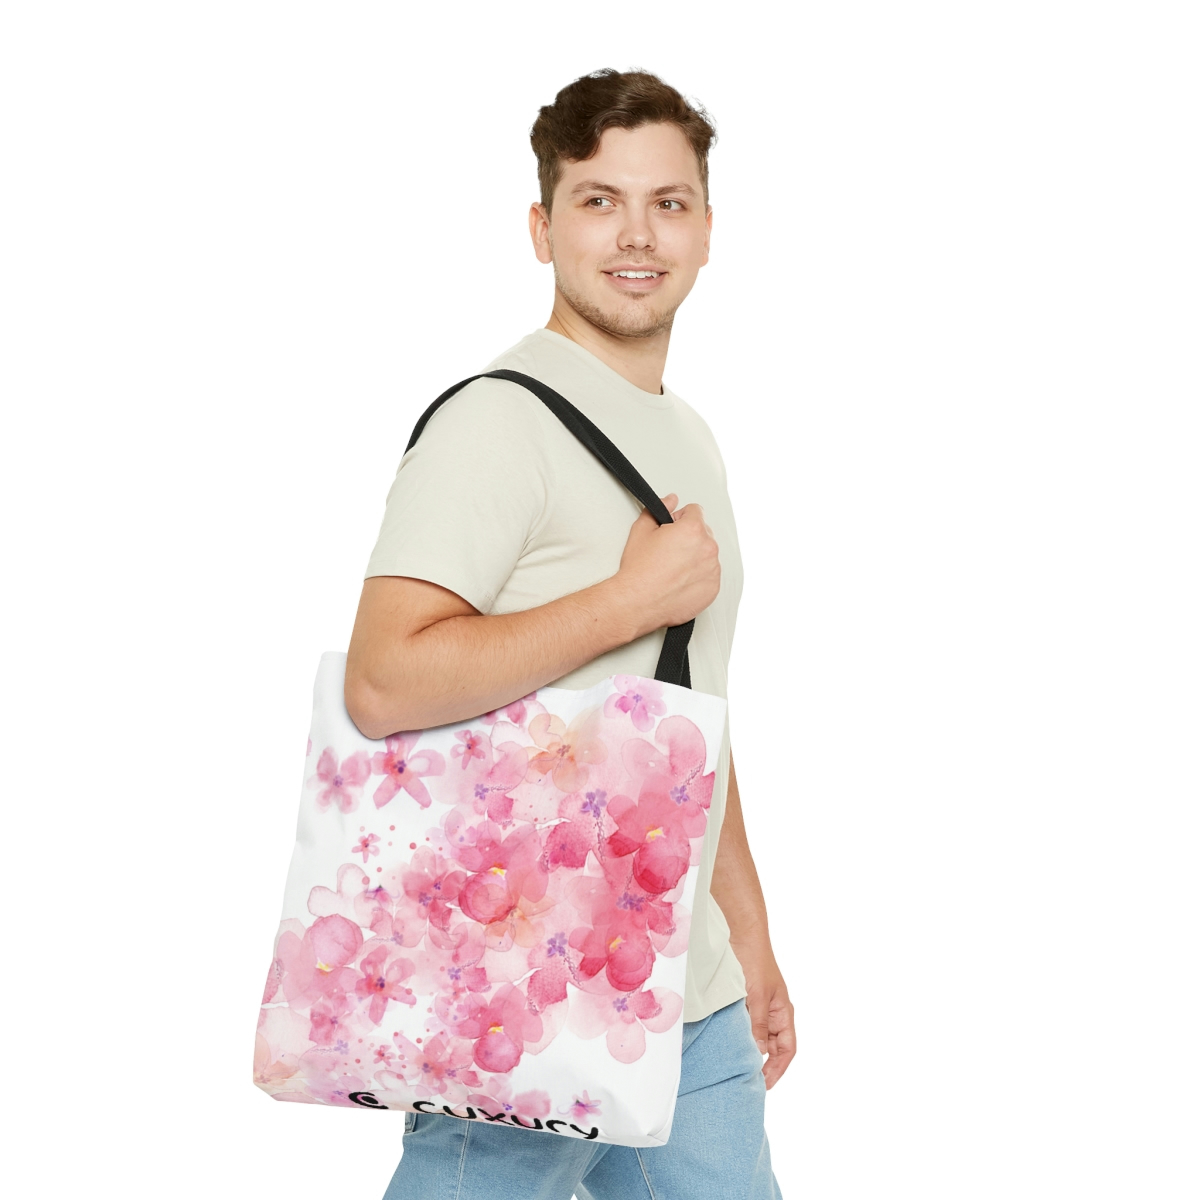  Bloomhale Designer Beach Bags and Totes - Large Flower